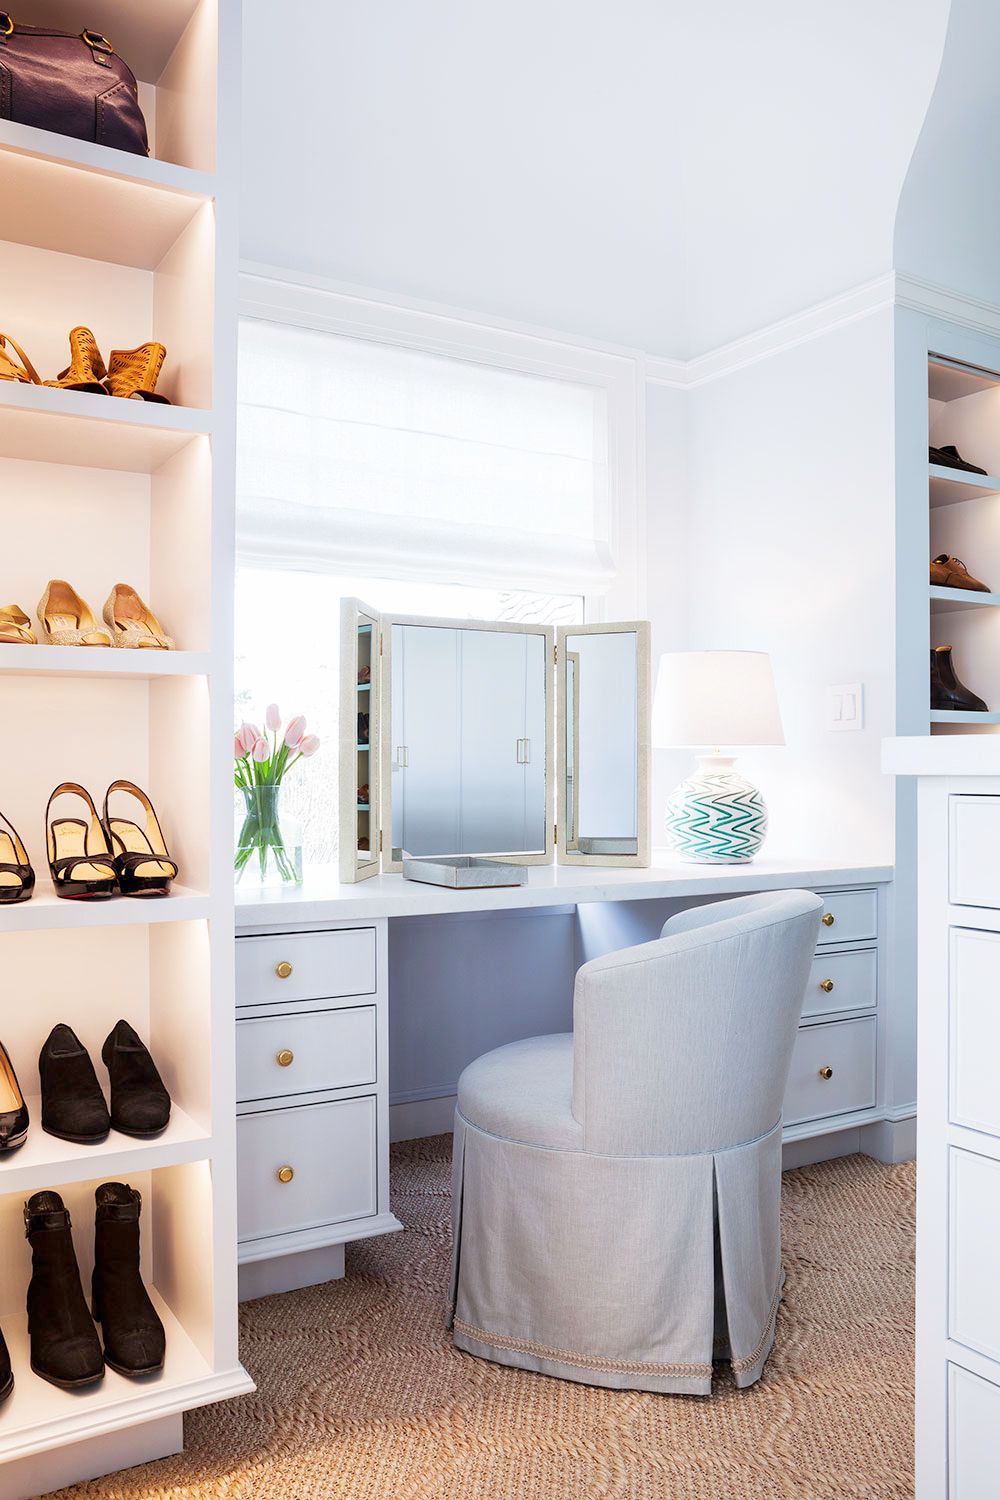 11 Stylish Makeup Vanity Ideas, How To Make A Dresser Into Makeup Vanity